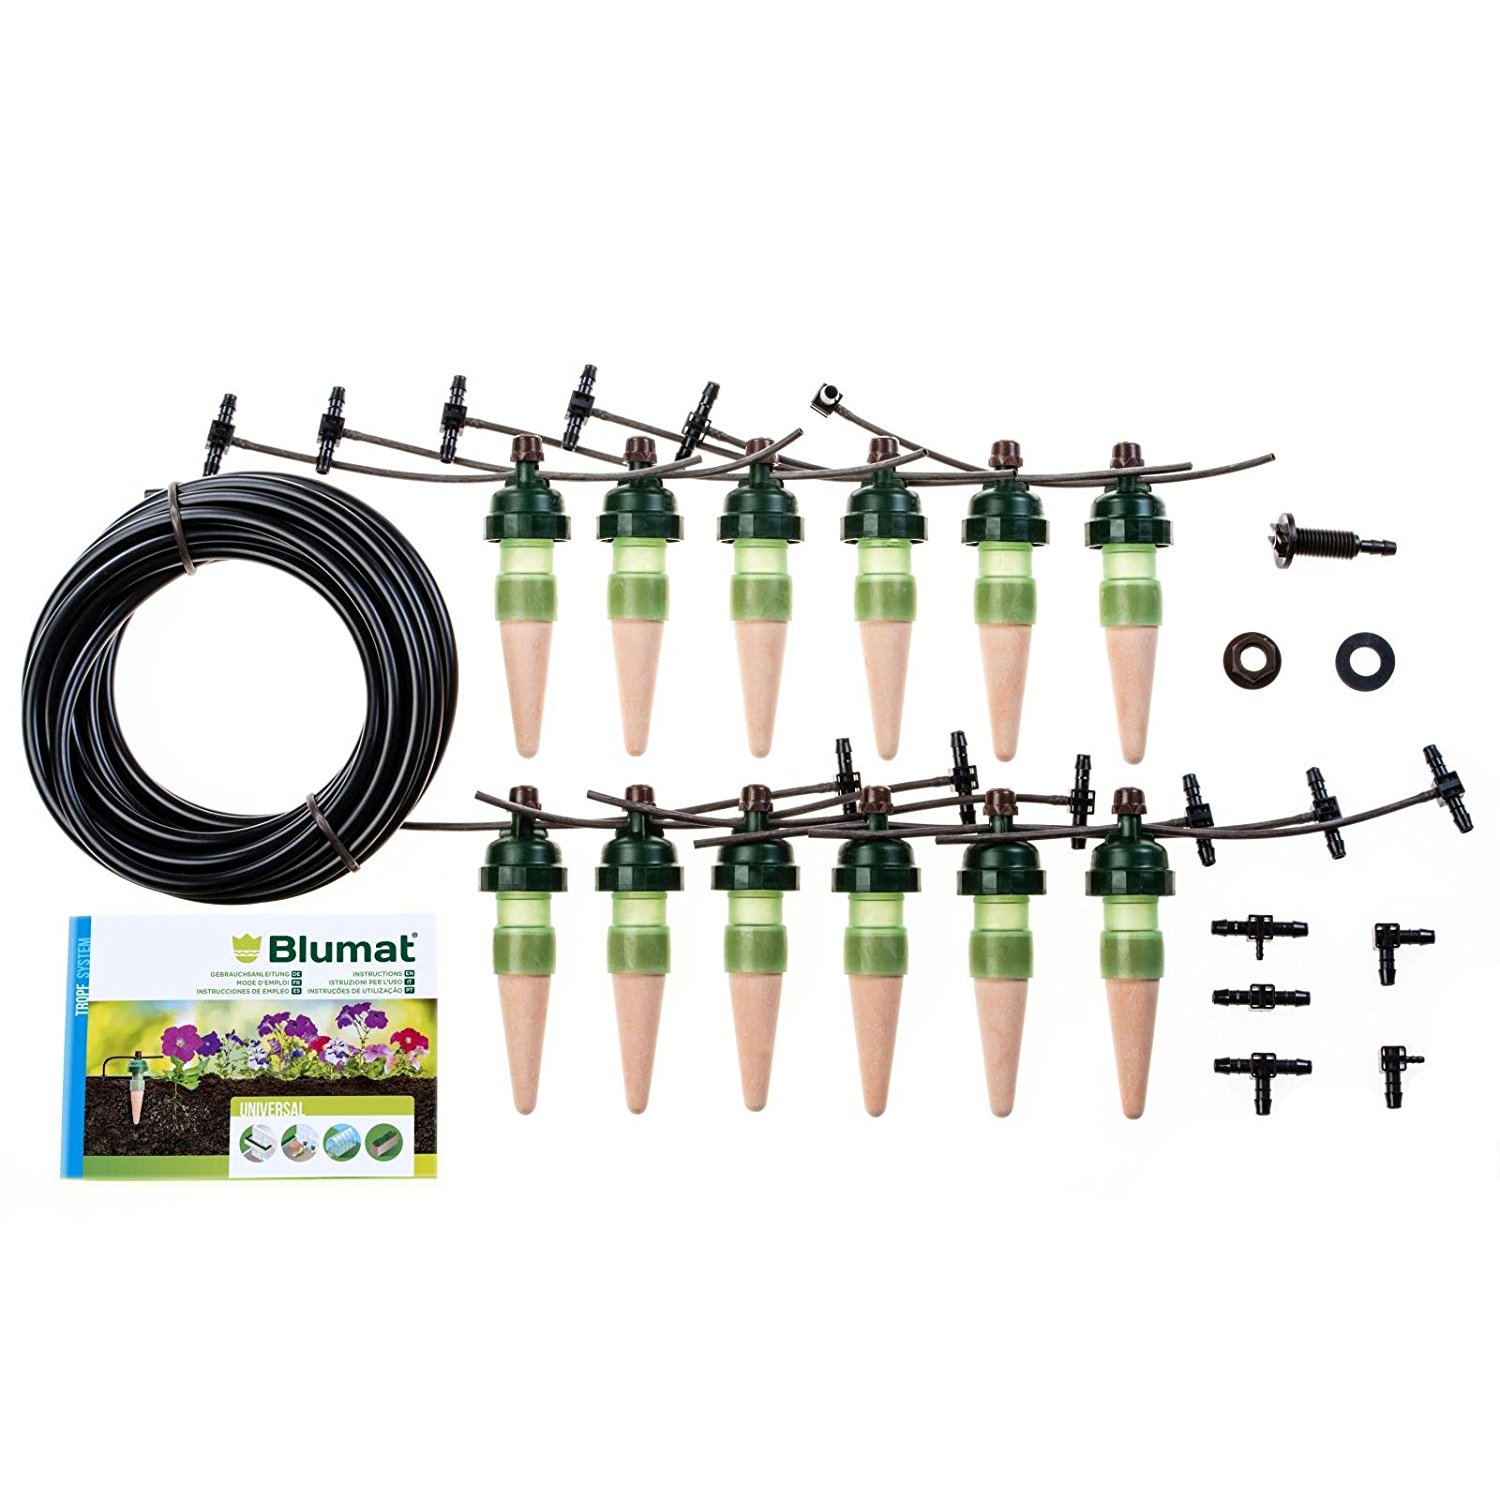 Automatic Drip Irrigation System for Garden Details about   5 Blumat Starter Watering Kit 